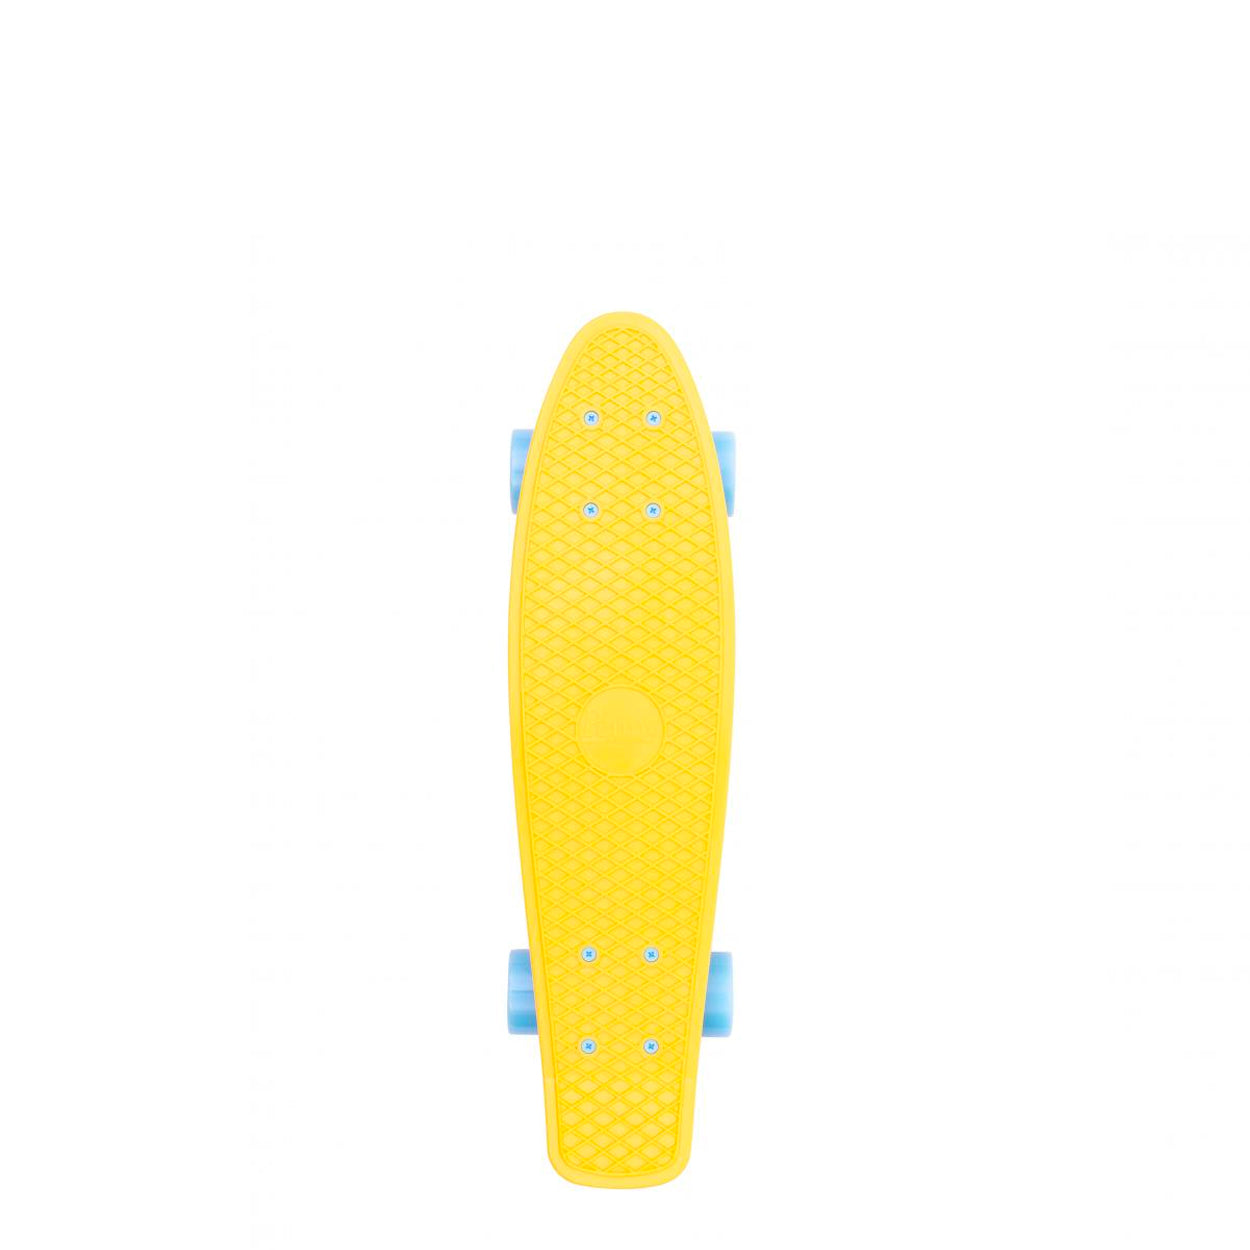 Penny Cruiser 22" - High Vibe - Prime Delux Store